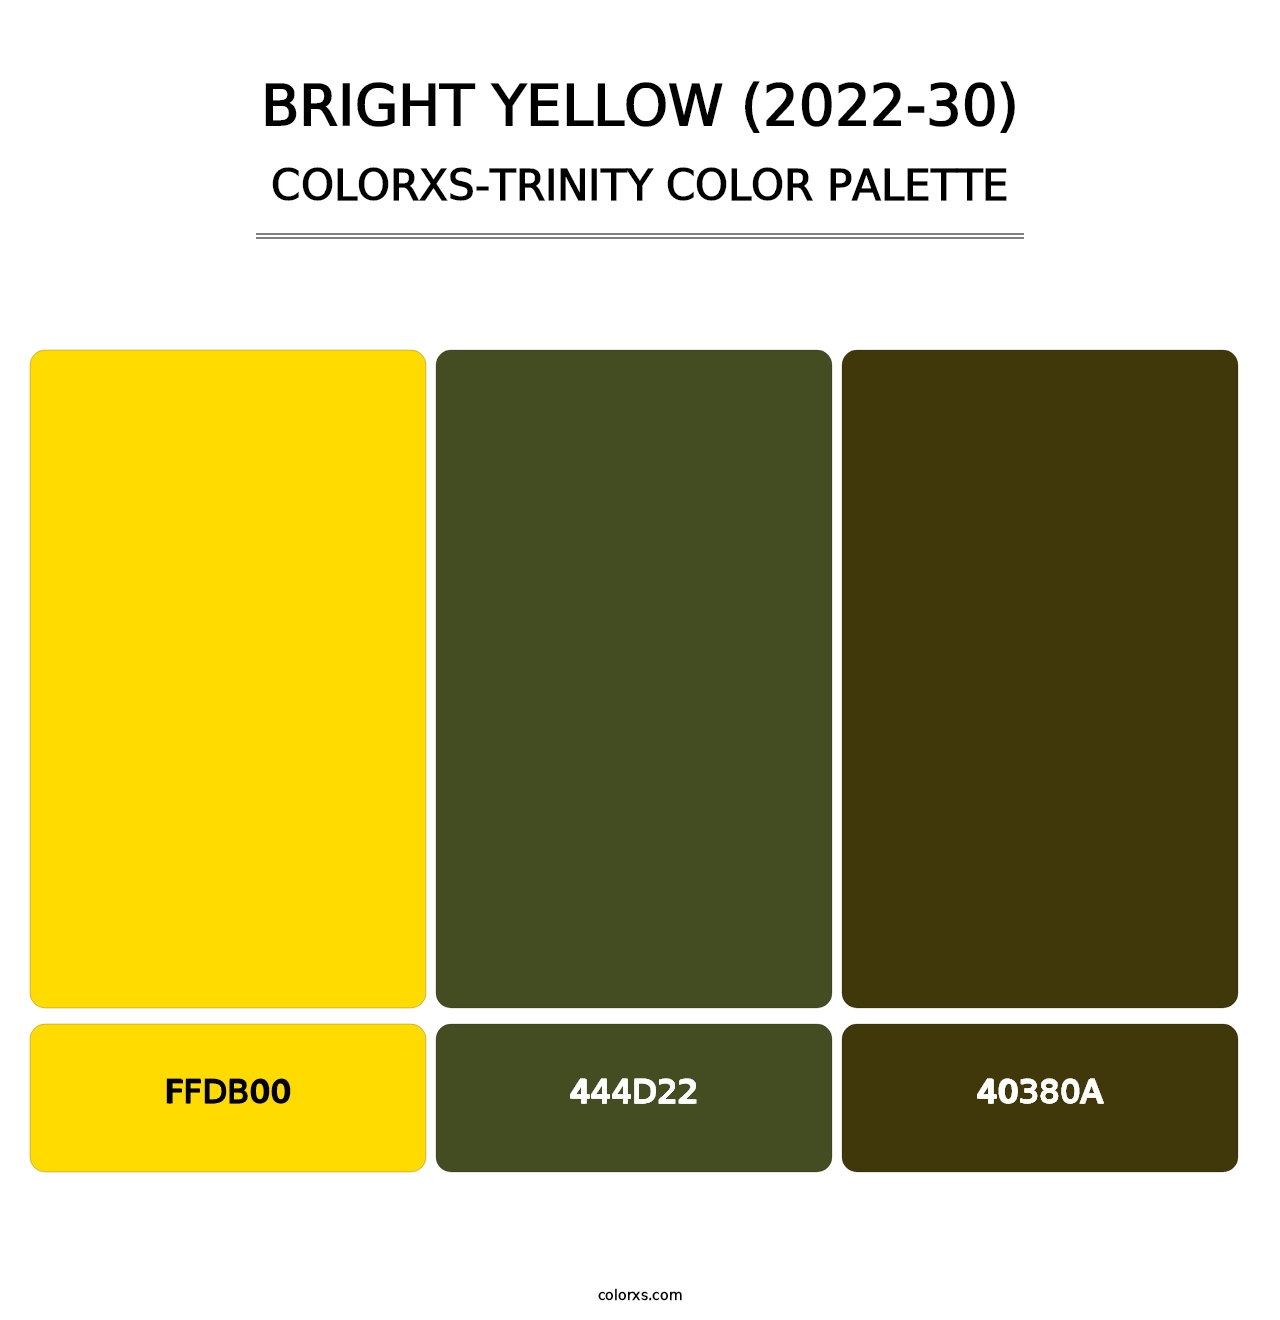 Bright Yellow (2022-30) - Colorxs Trinity Palette